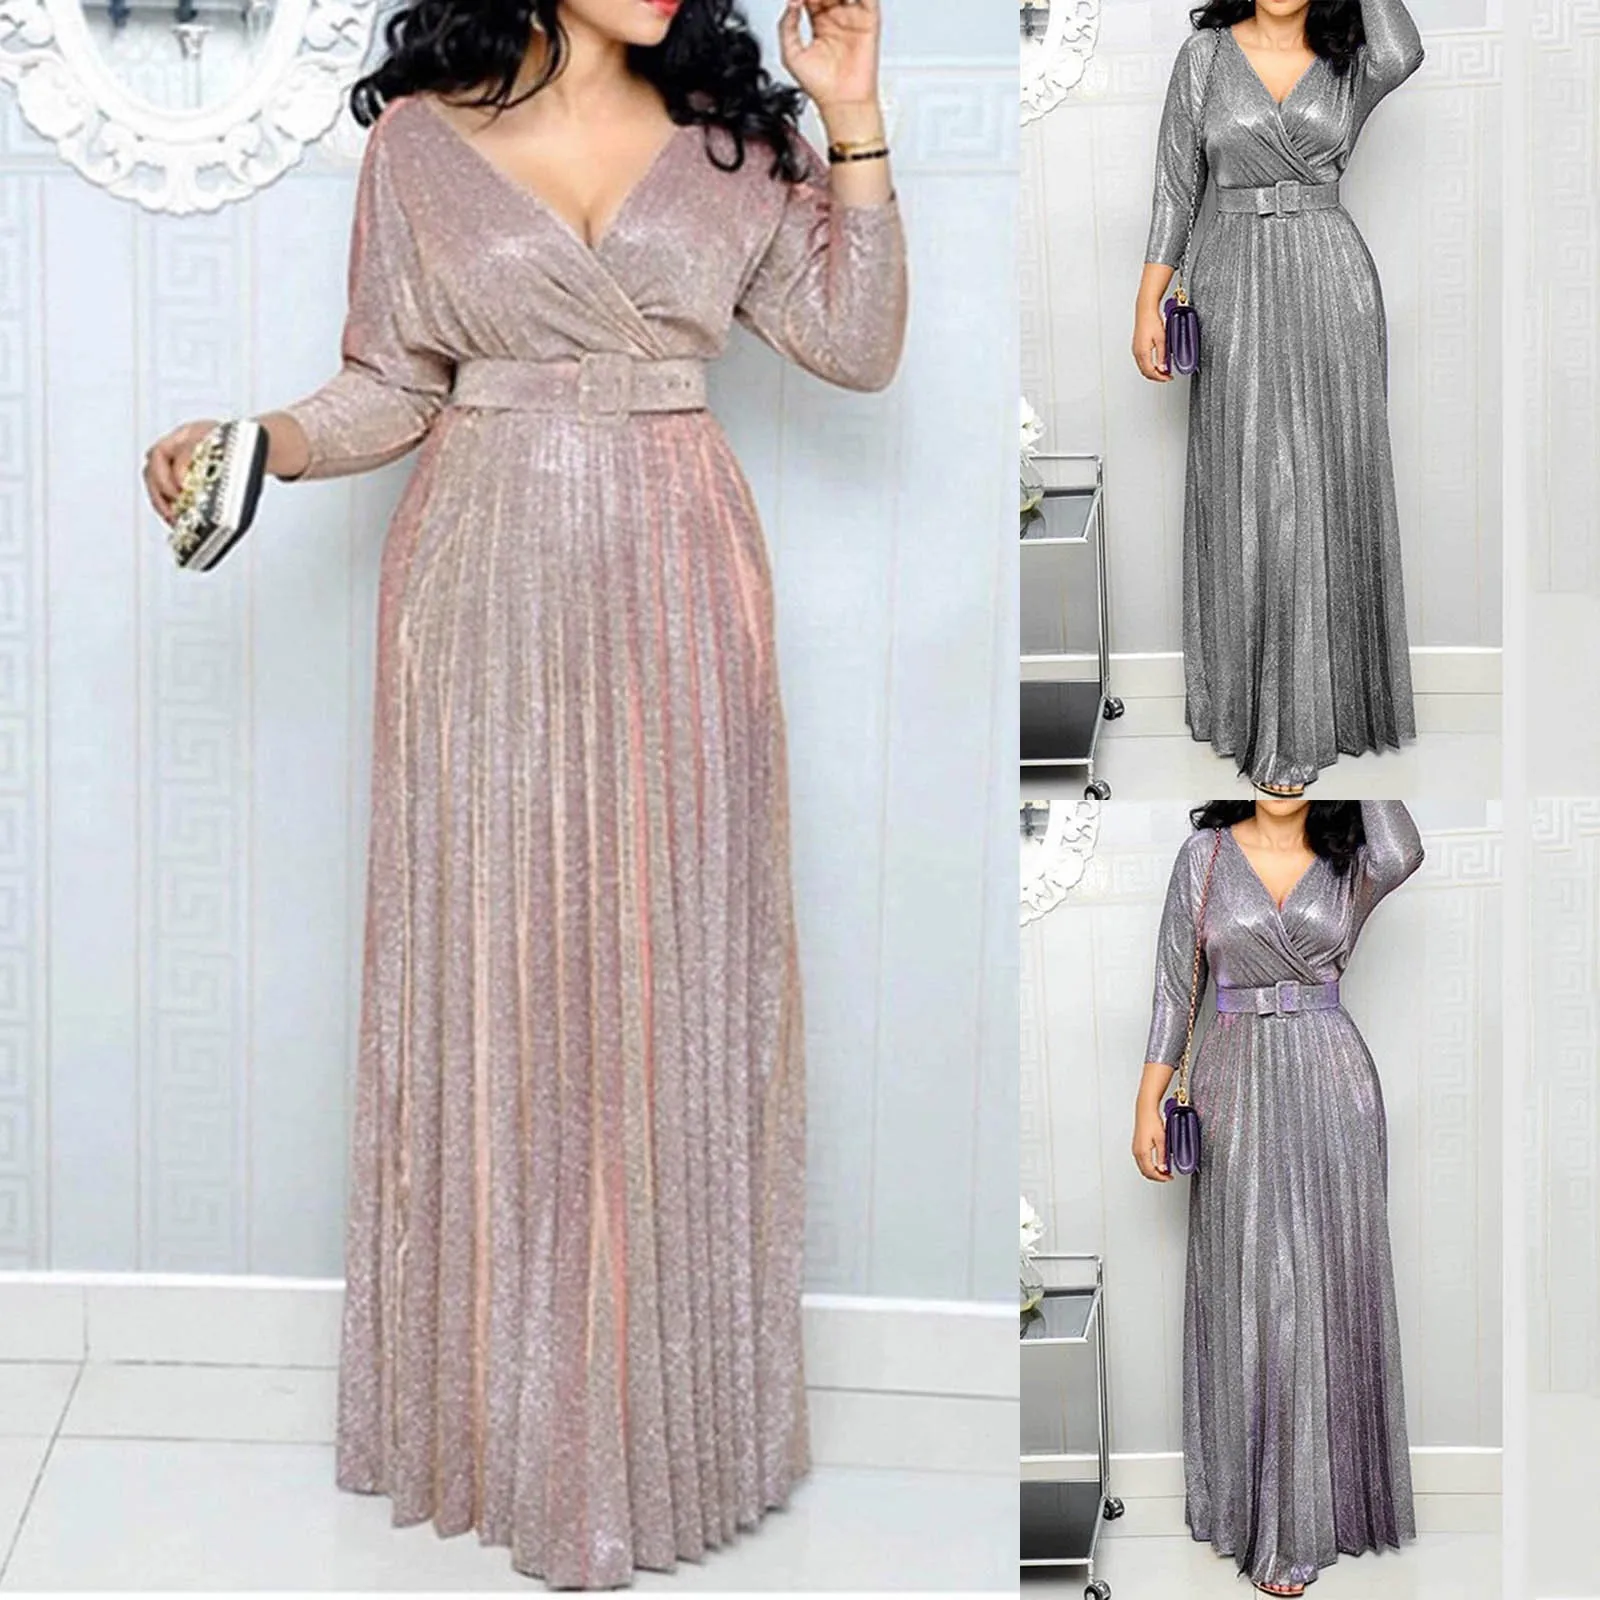 

Fashion Deep V-neck Sequin Party Dress Women's Sexy Pink Glitter Sequined Evening Cocktail Dresses Female Chic Wedding Dress